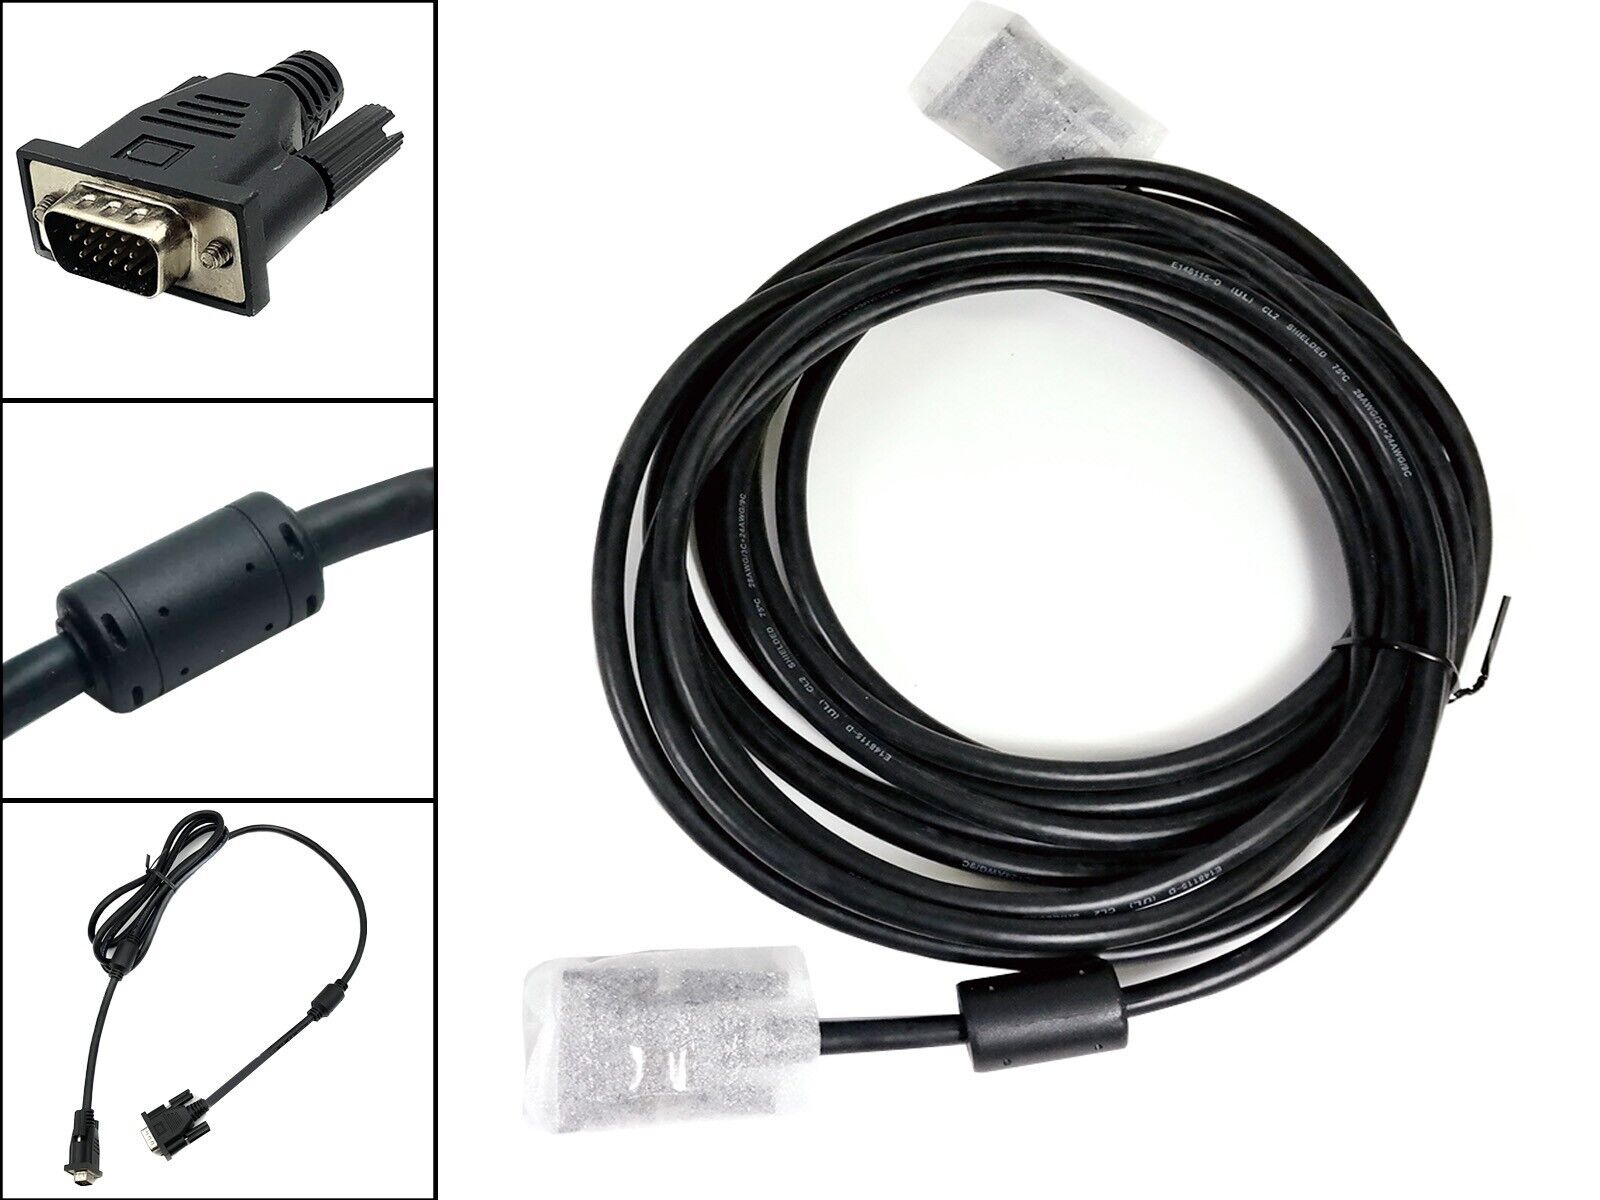 Branded 10ft VGA Cord Full HD 1080p SVGA Male Cable PC Laptop HDTV Monitor Cable